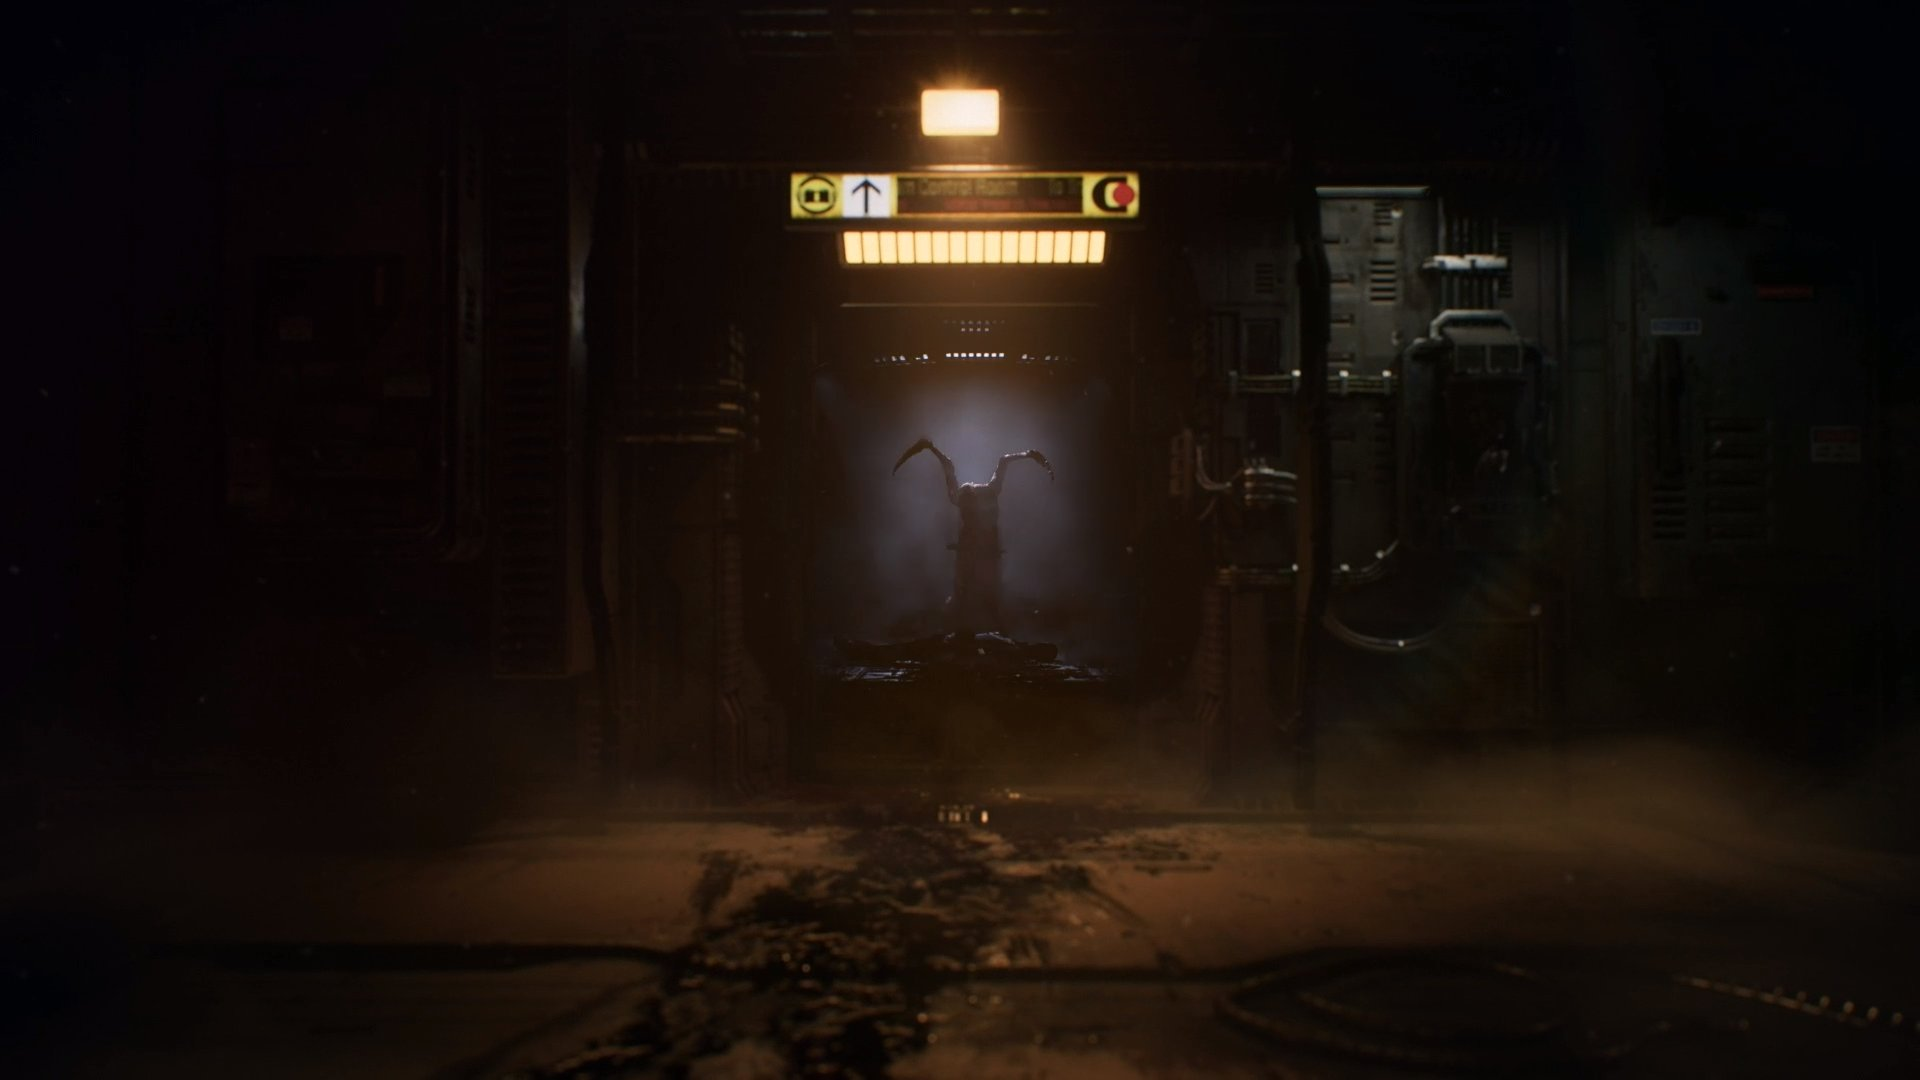 Dead Space remake trailer imagery